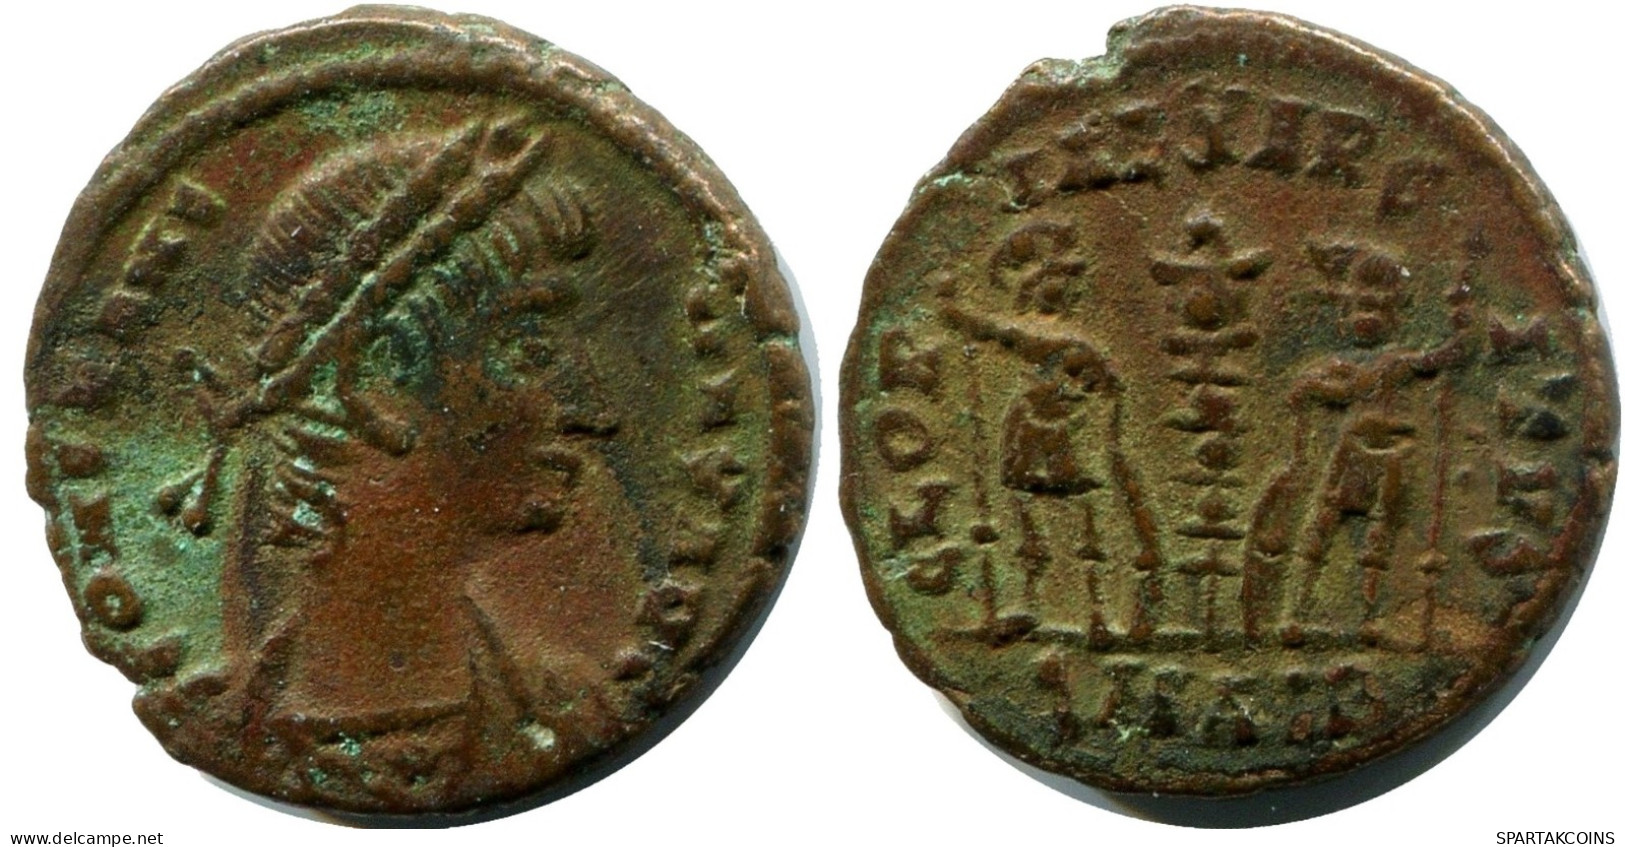 CONSTANS MINTED IN ALEKSANDRIA FROM THE ROYAL ONTARIO MUSEUM #ANC11394.14.D.A - The Christian Empire (307 AD Tot 363 AD)